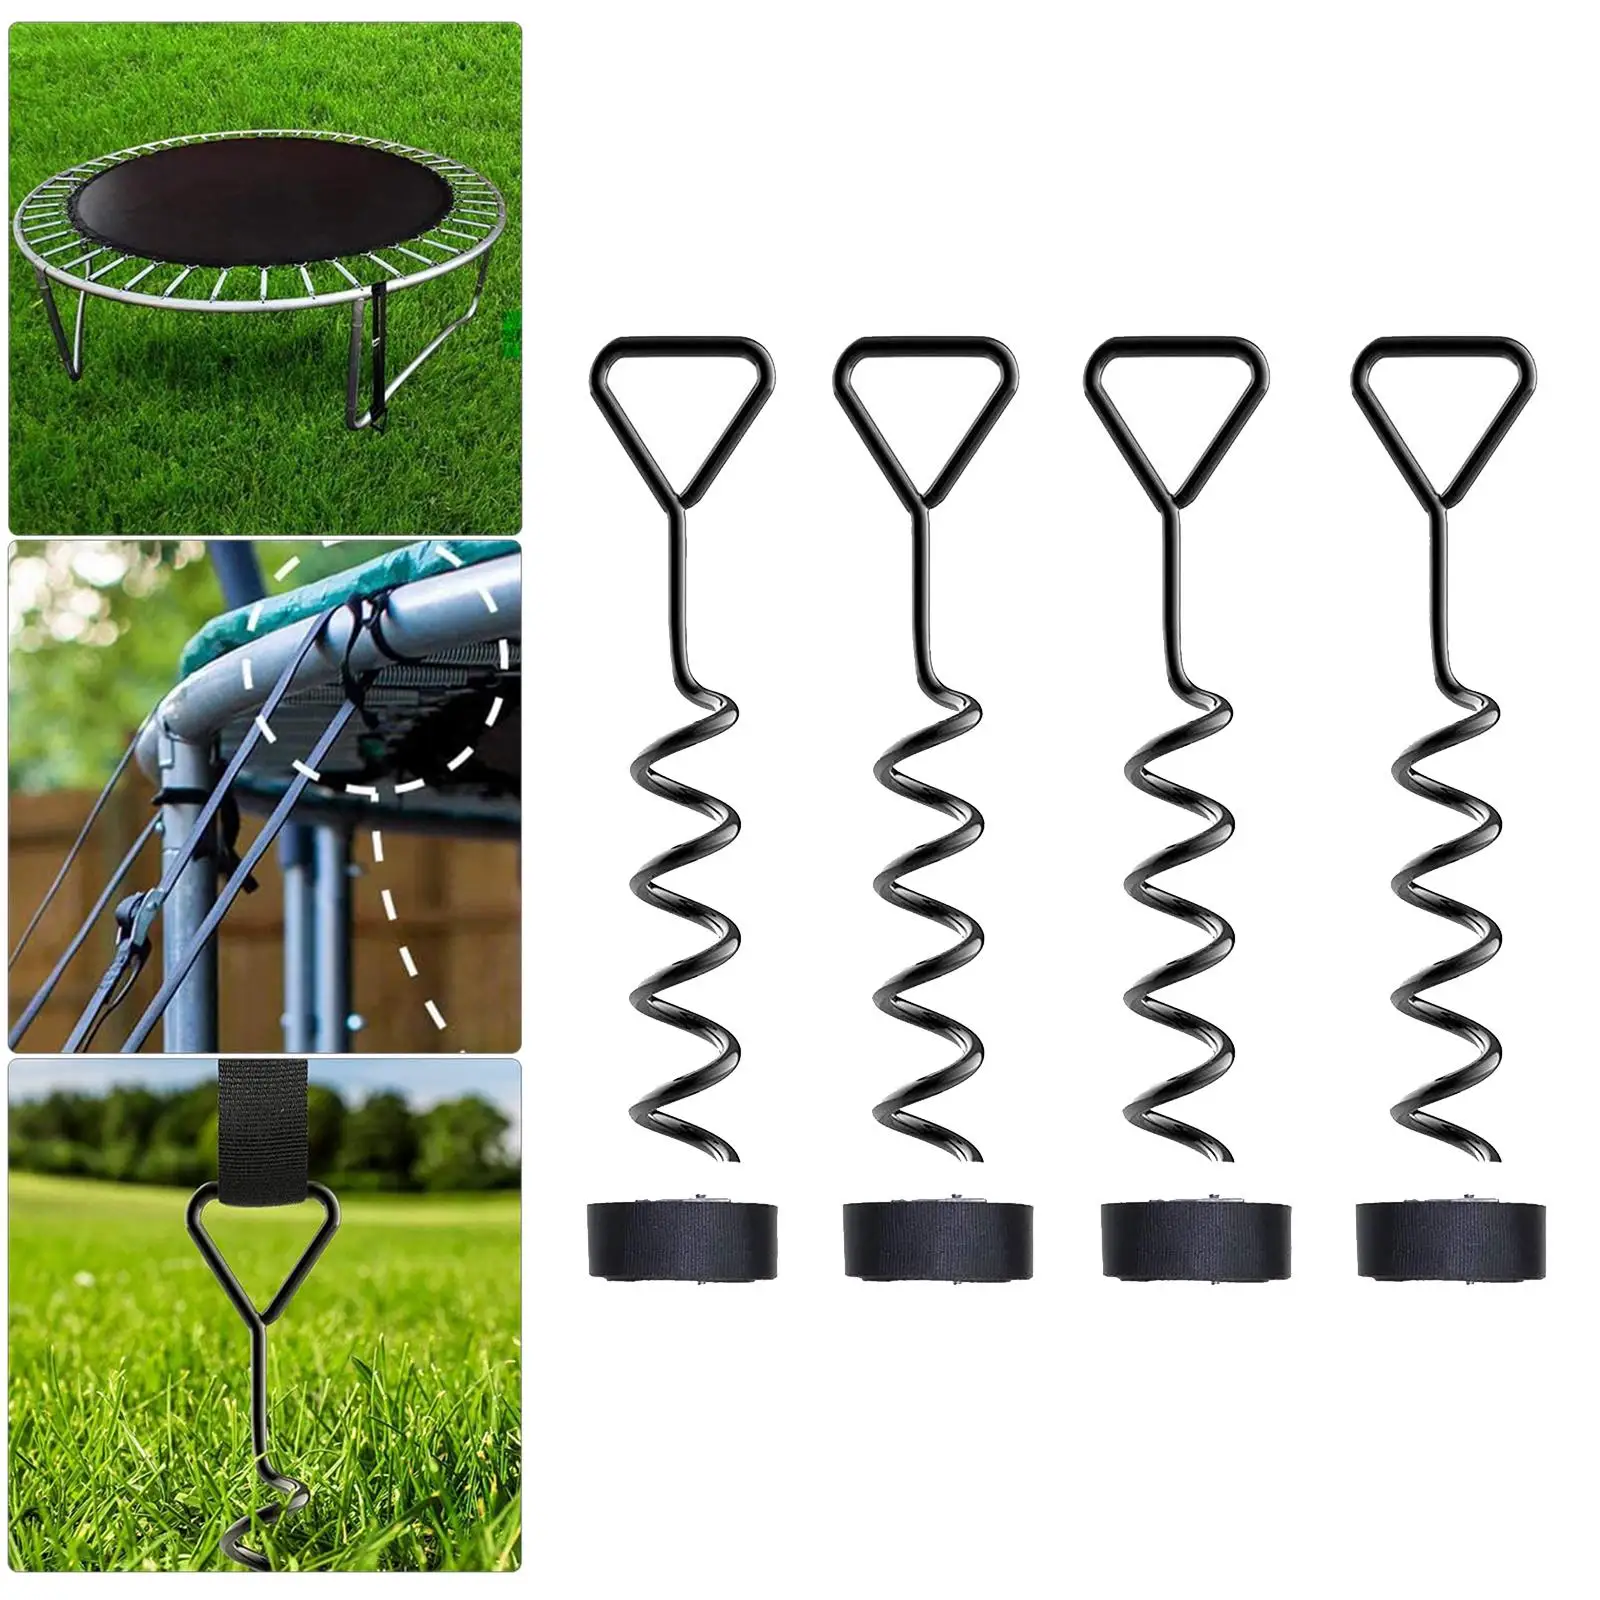  Camping Ground Anchor Trampoline Stakes Spiral Ground Anchor Trampoline Stakes Tent Canopies Accessory